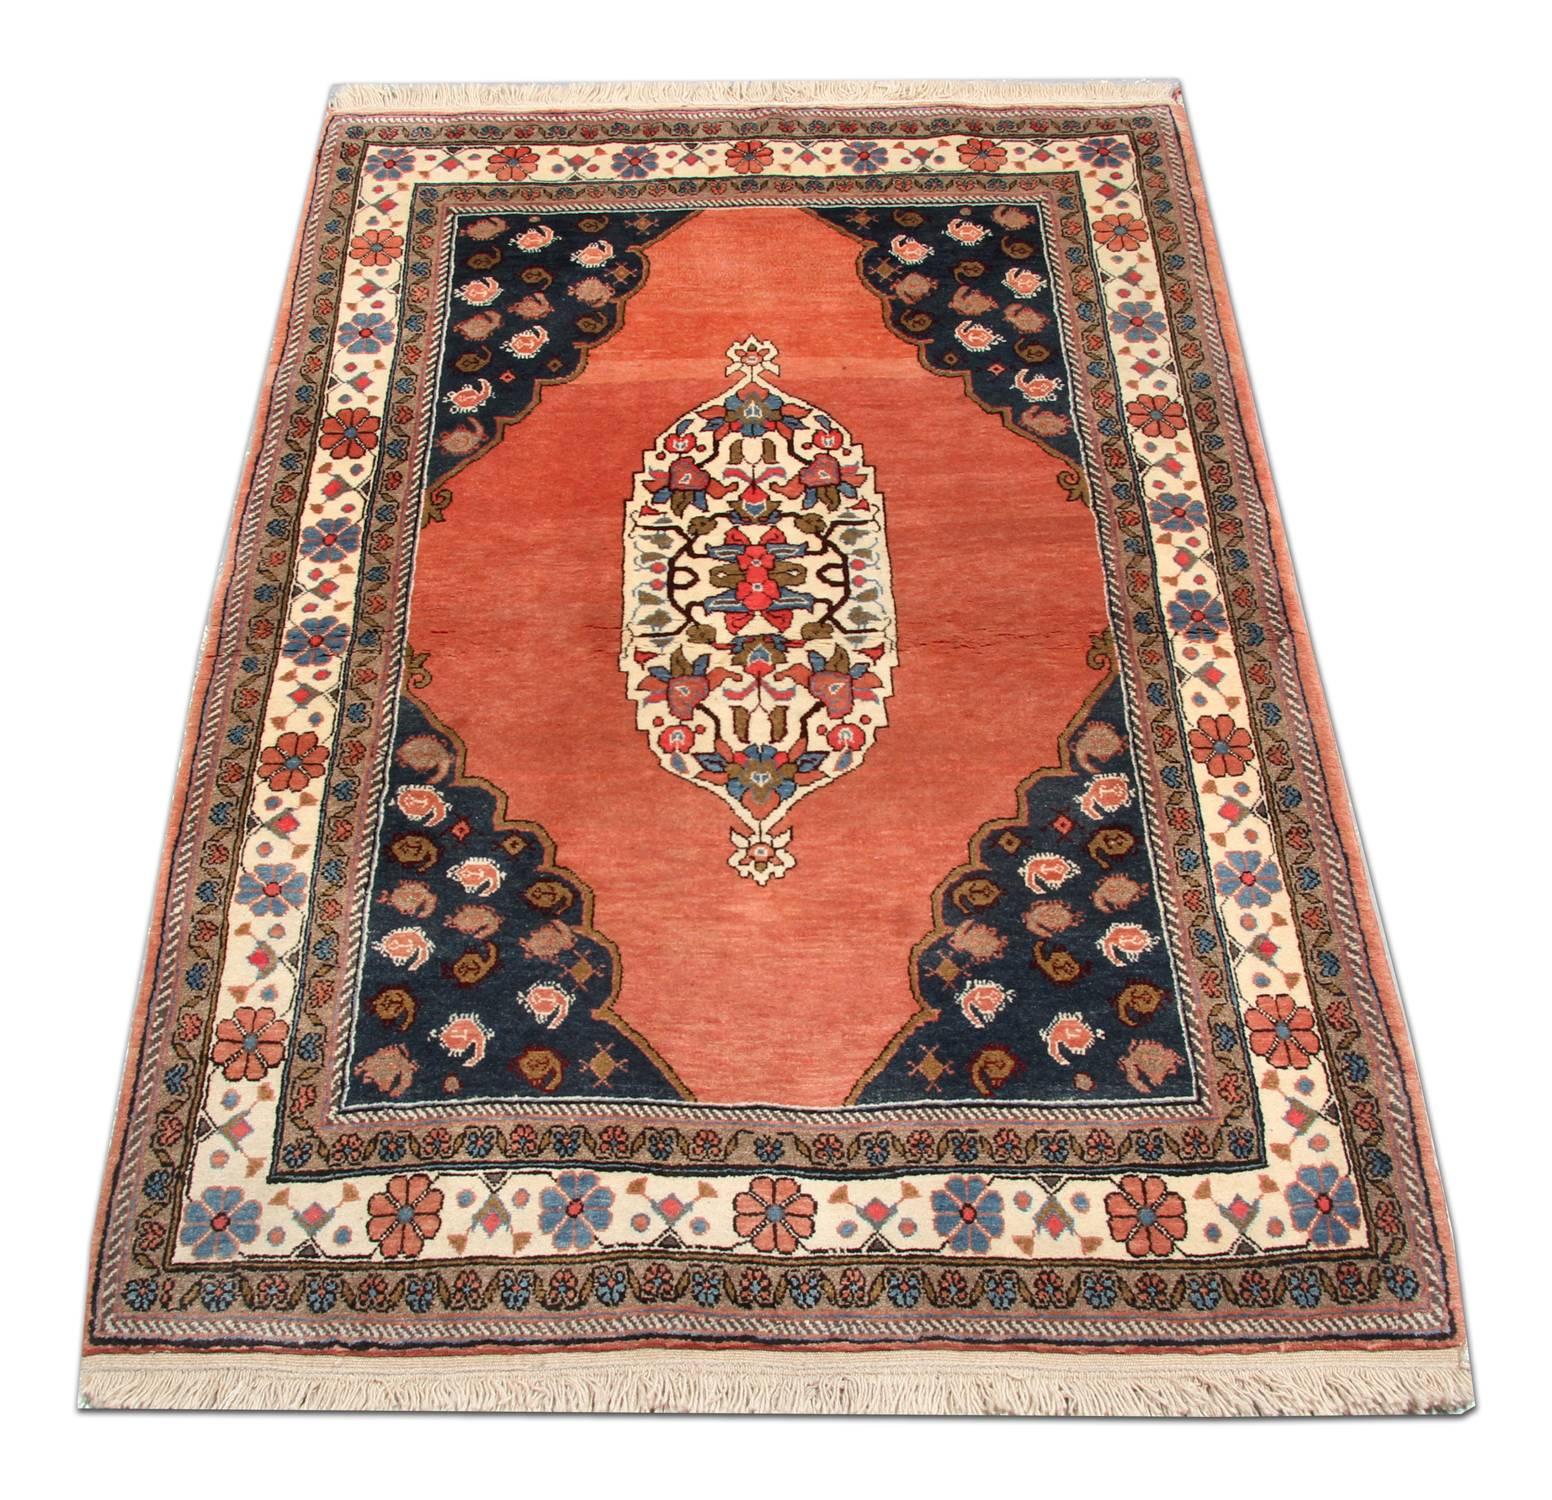 This delicate Oriental wool area rug has been woven by hand and features an open pink field with a large oval medallion which has been intricately woven in accents of green, blue and pink on an ivory background. This has been framed by a decorative